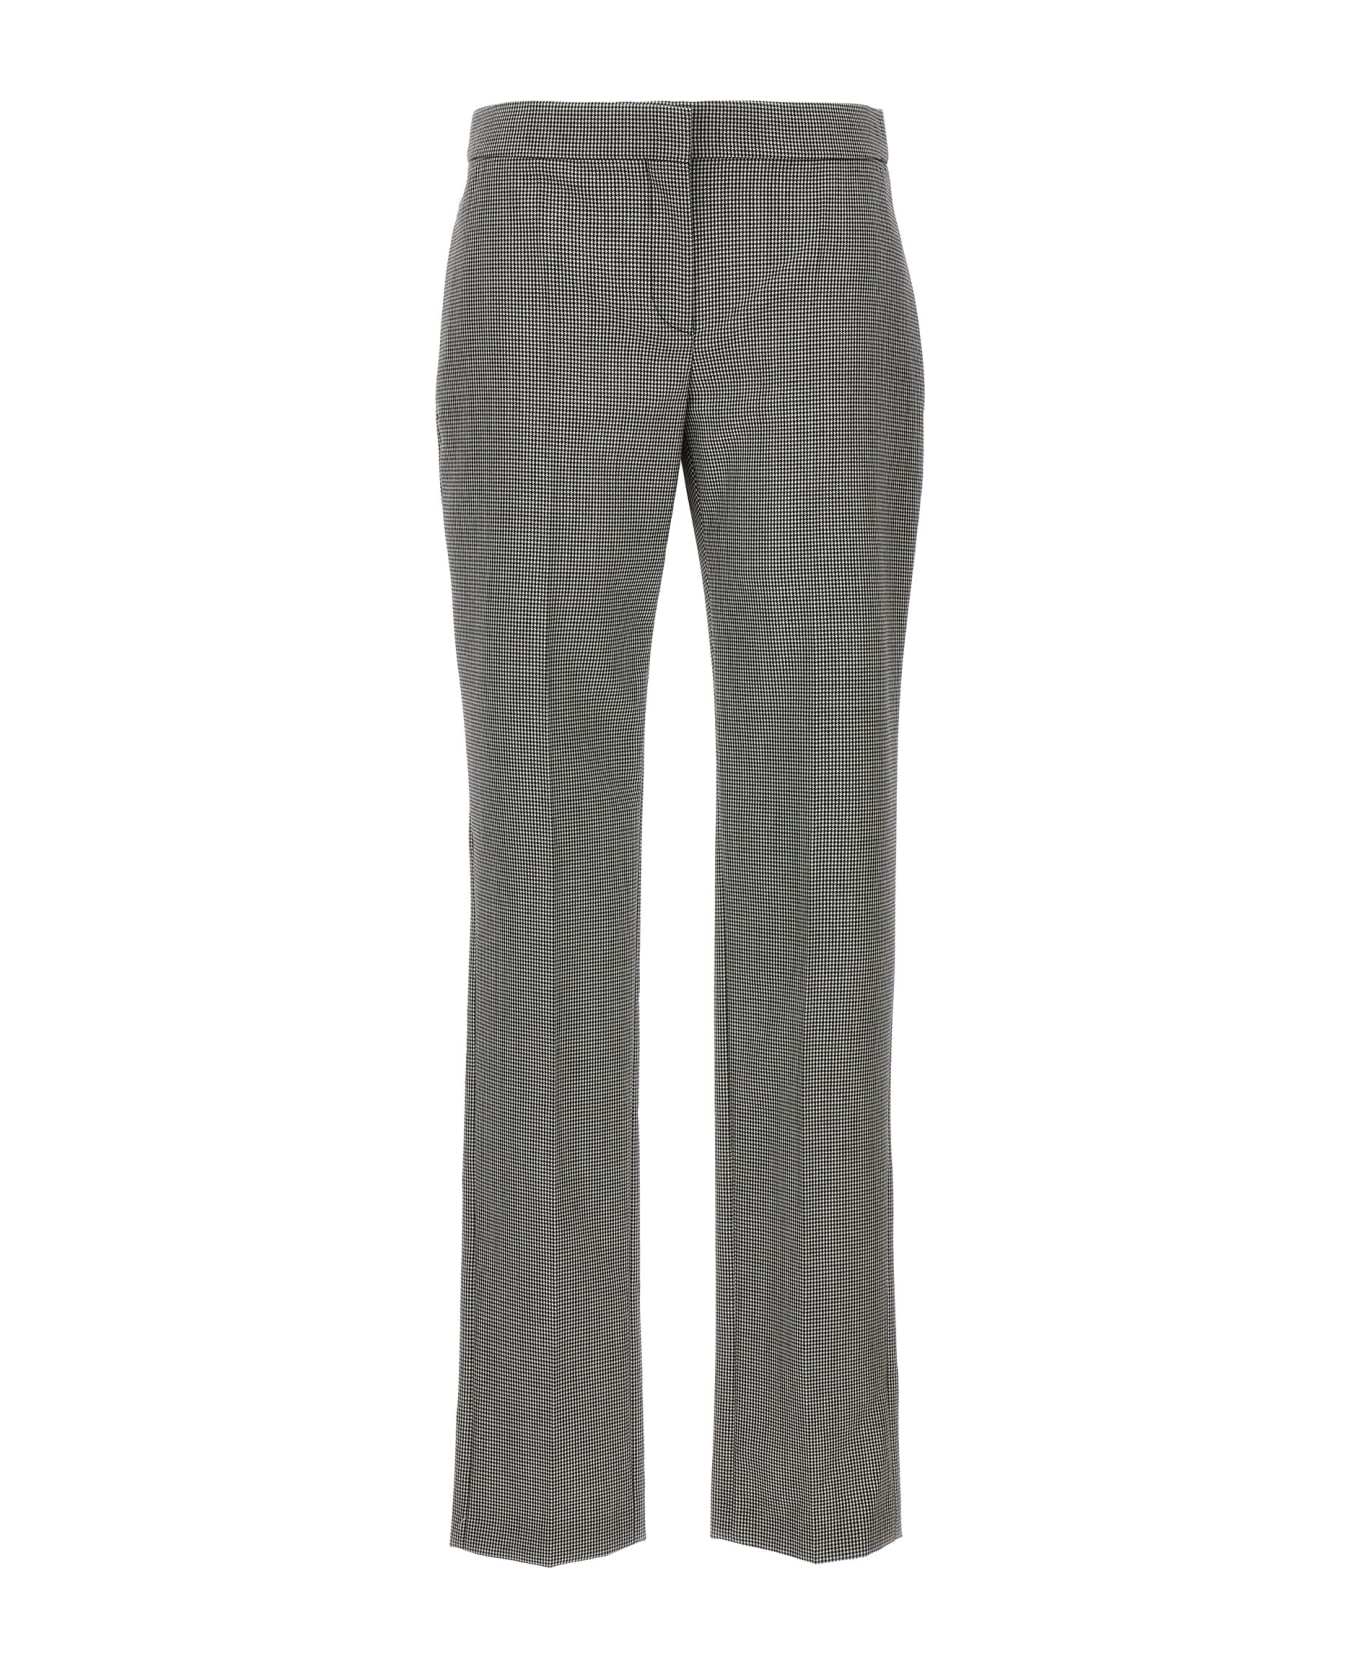 Alexander McQueen Tailored Pants With Houndstooth Motif In Wool - White/Black ボトムス